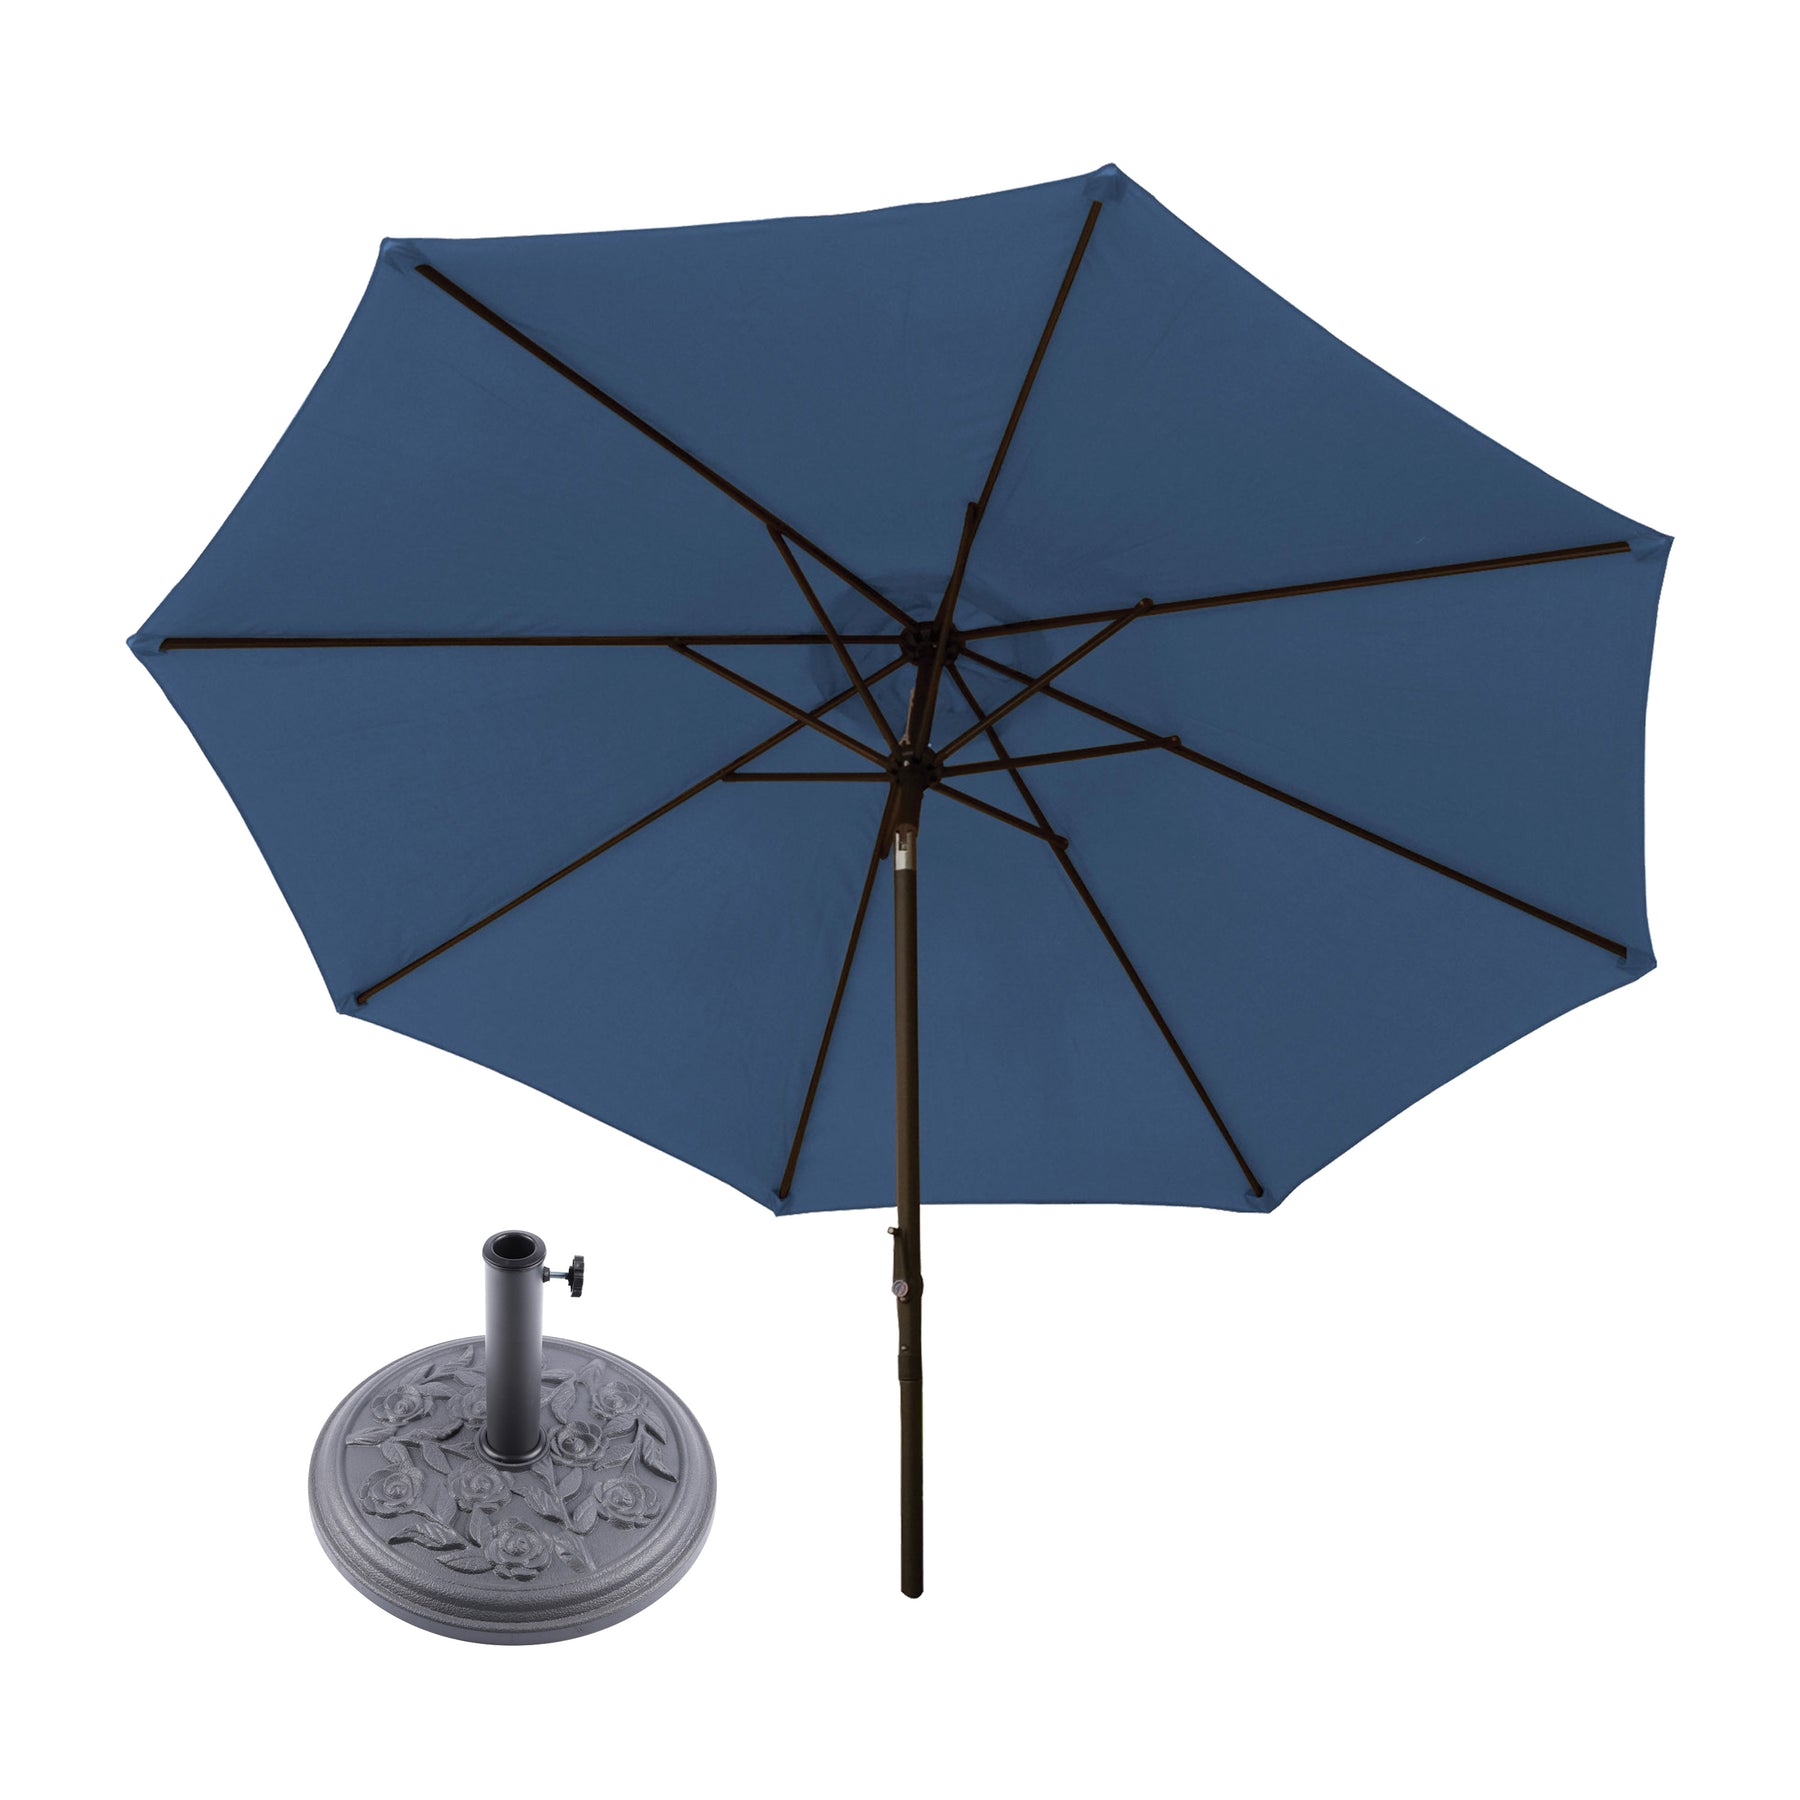 Bliss Outdoors 9-foot Patio Umbrella with Aluminum Pole in the blue variation and a Heavy-Duty Umbrella Base in the rose variation.